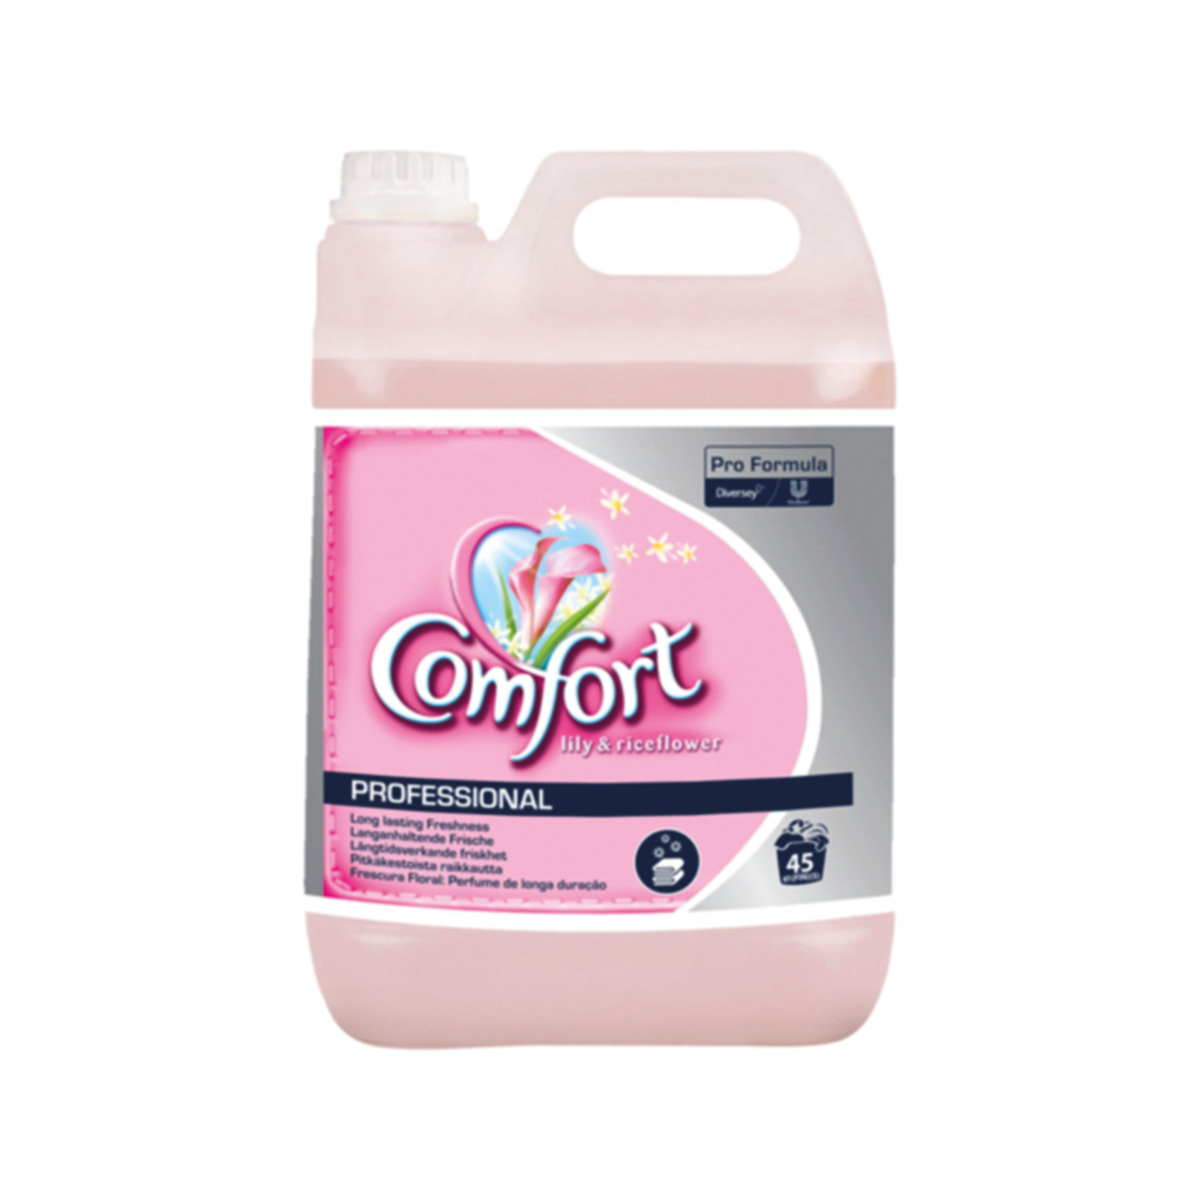 Comfort Professional Fabric Softener Lily & Rice Flower